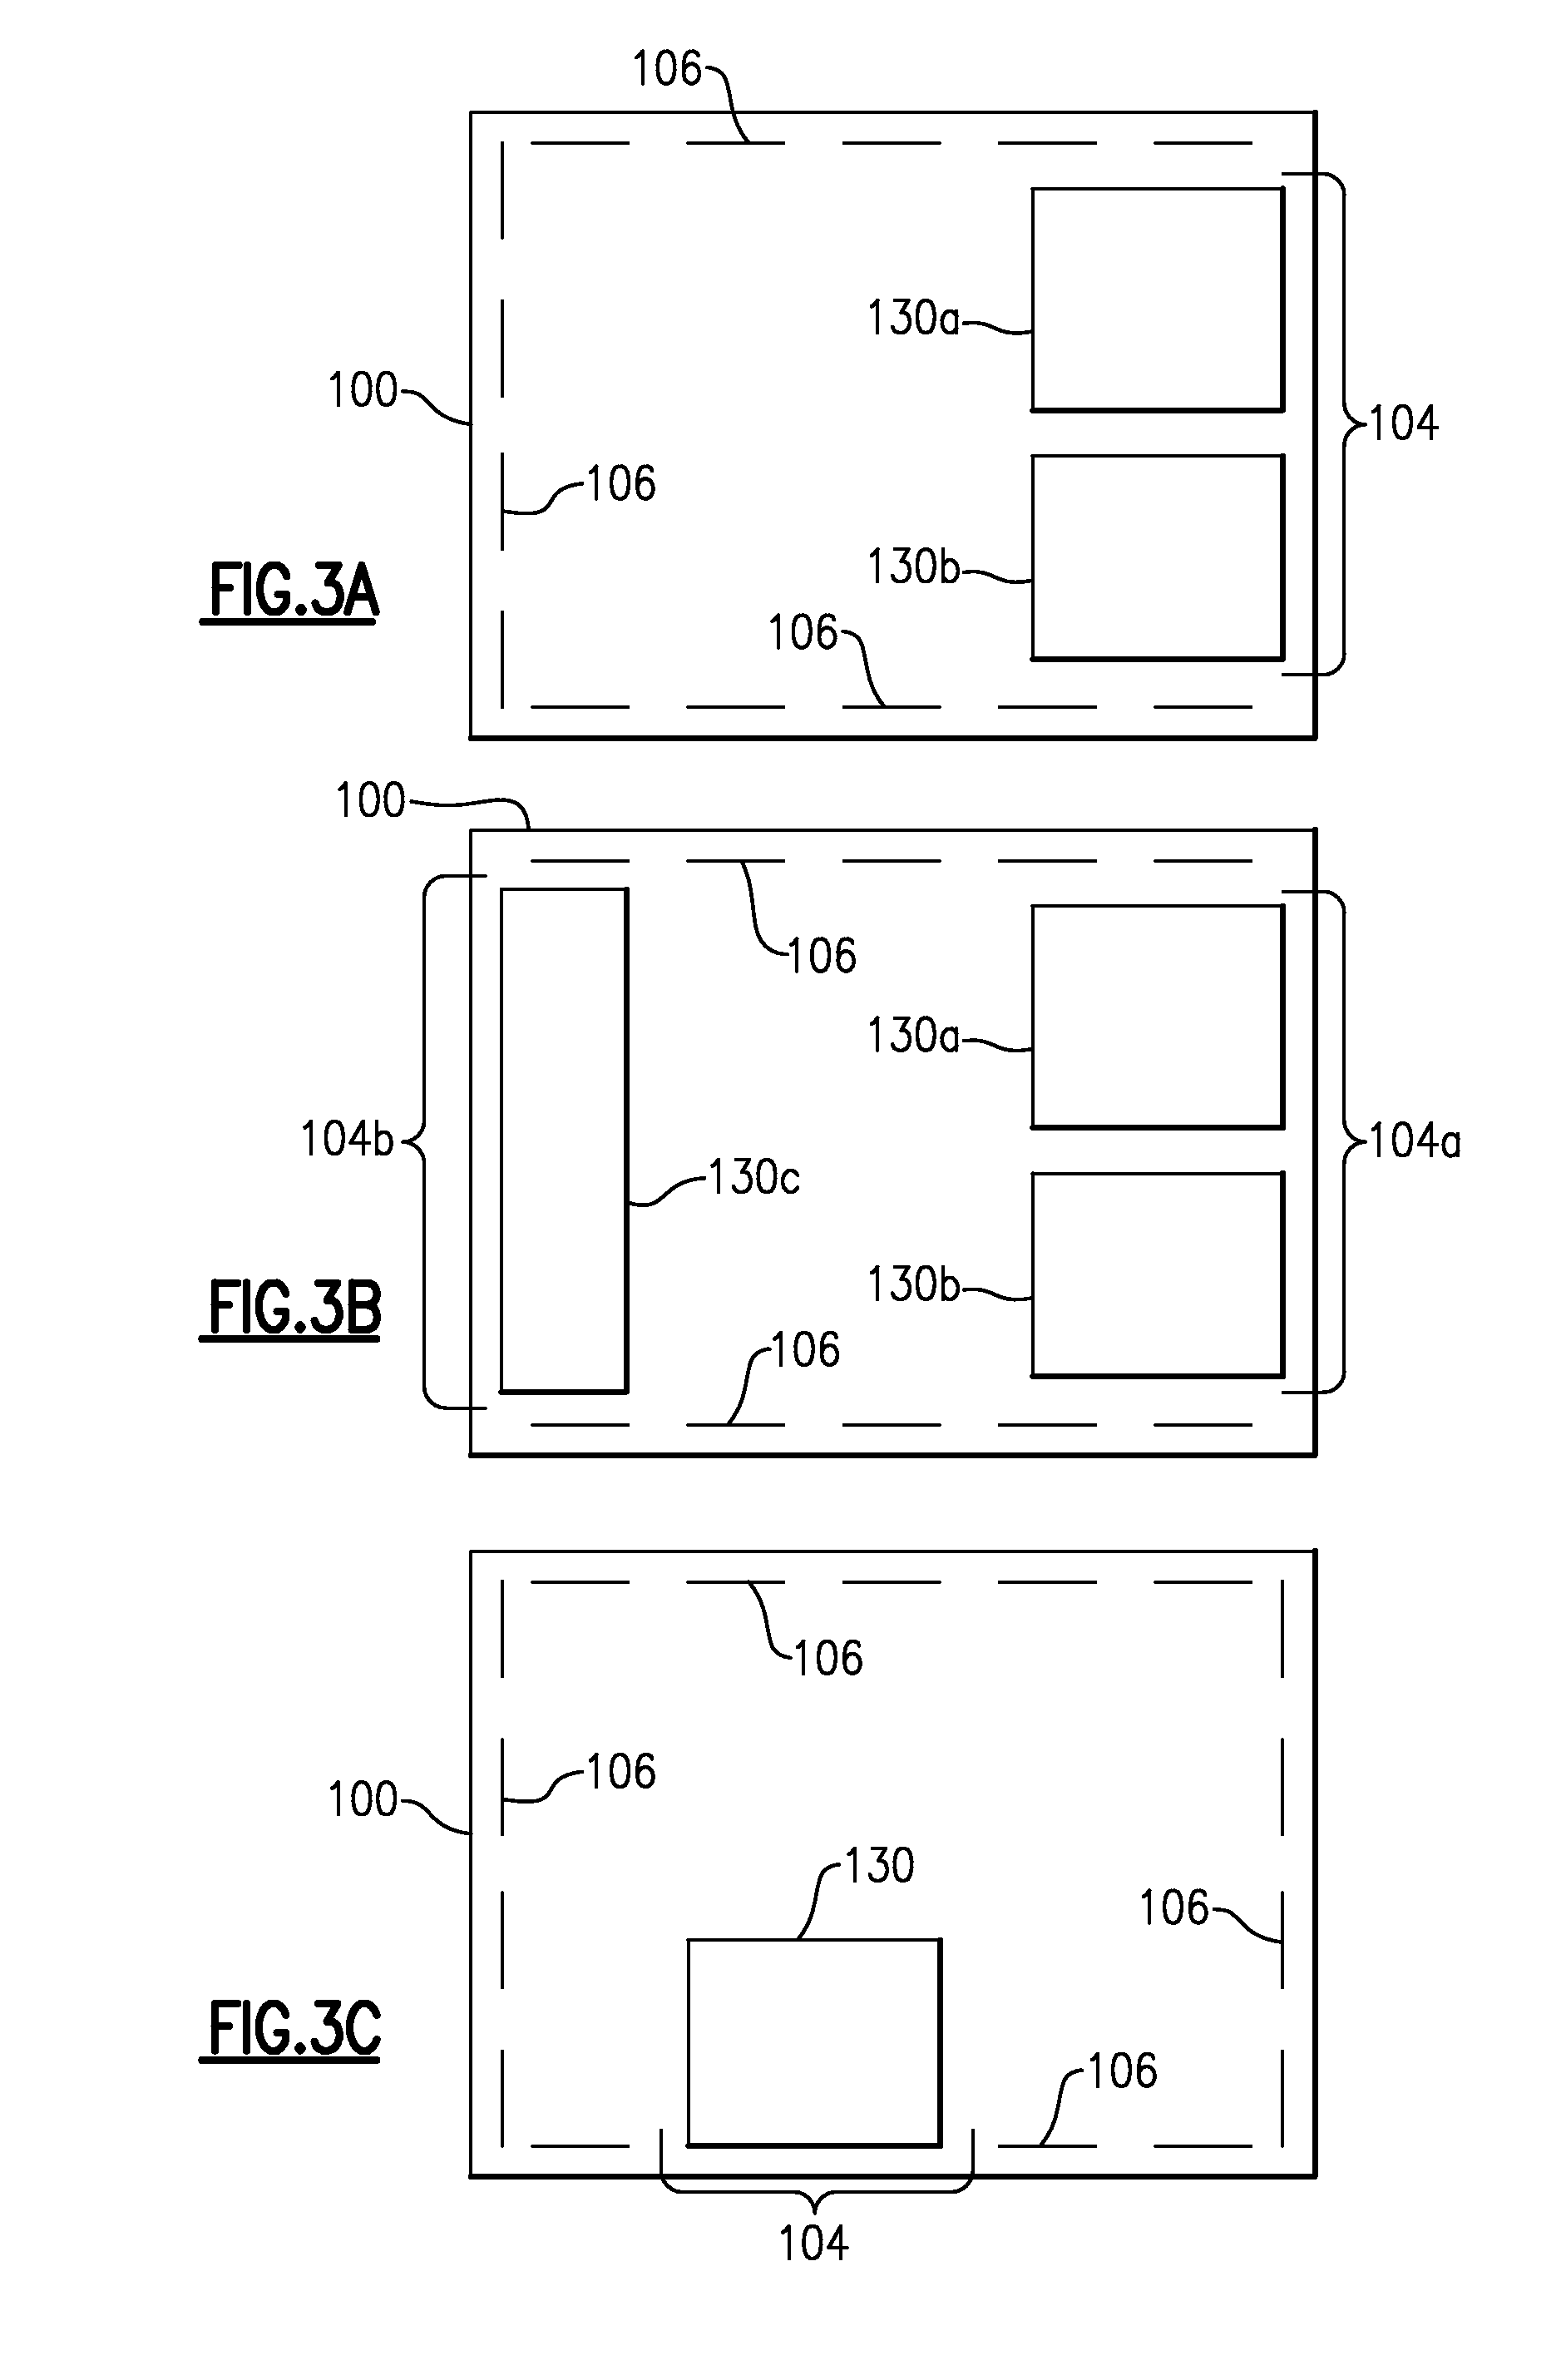 Apparatus and methods related to ground paths implemented with surface mount devices